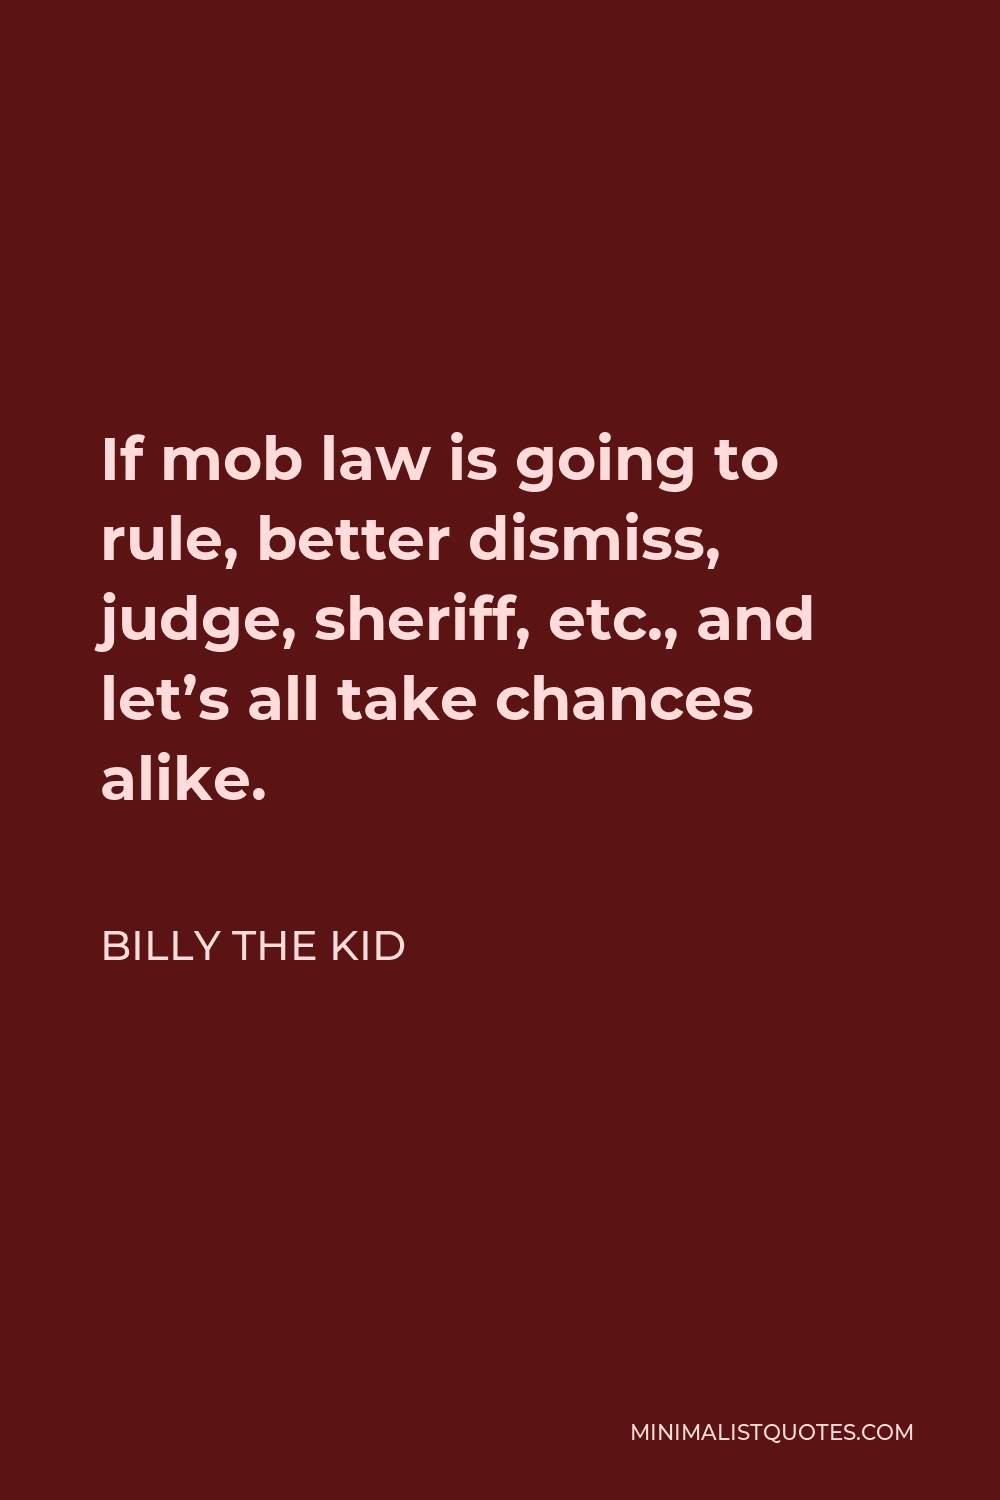 Billy the Kid Quote - If mob law is going to rule, better dismiss, judge, sheriff, etc., and let’s all take chances alike.